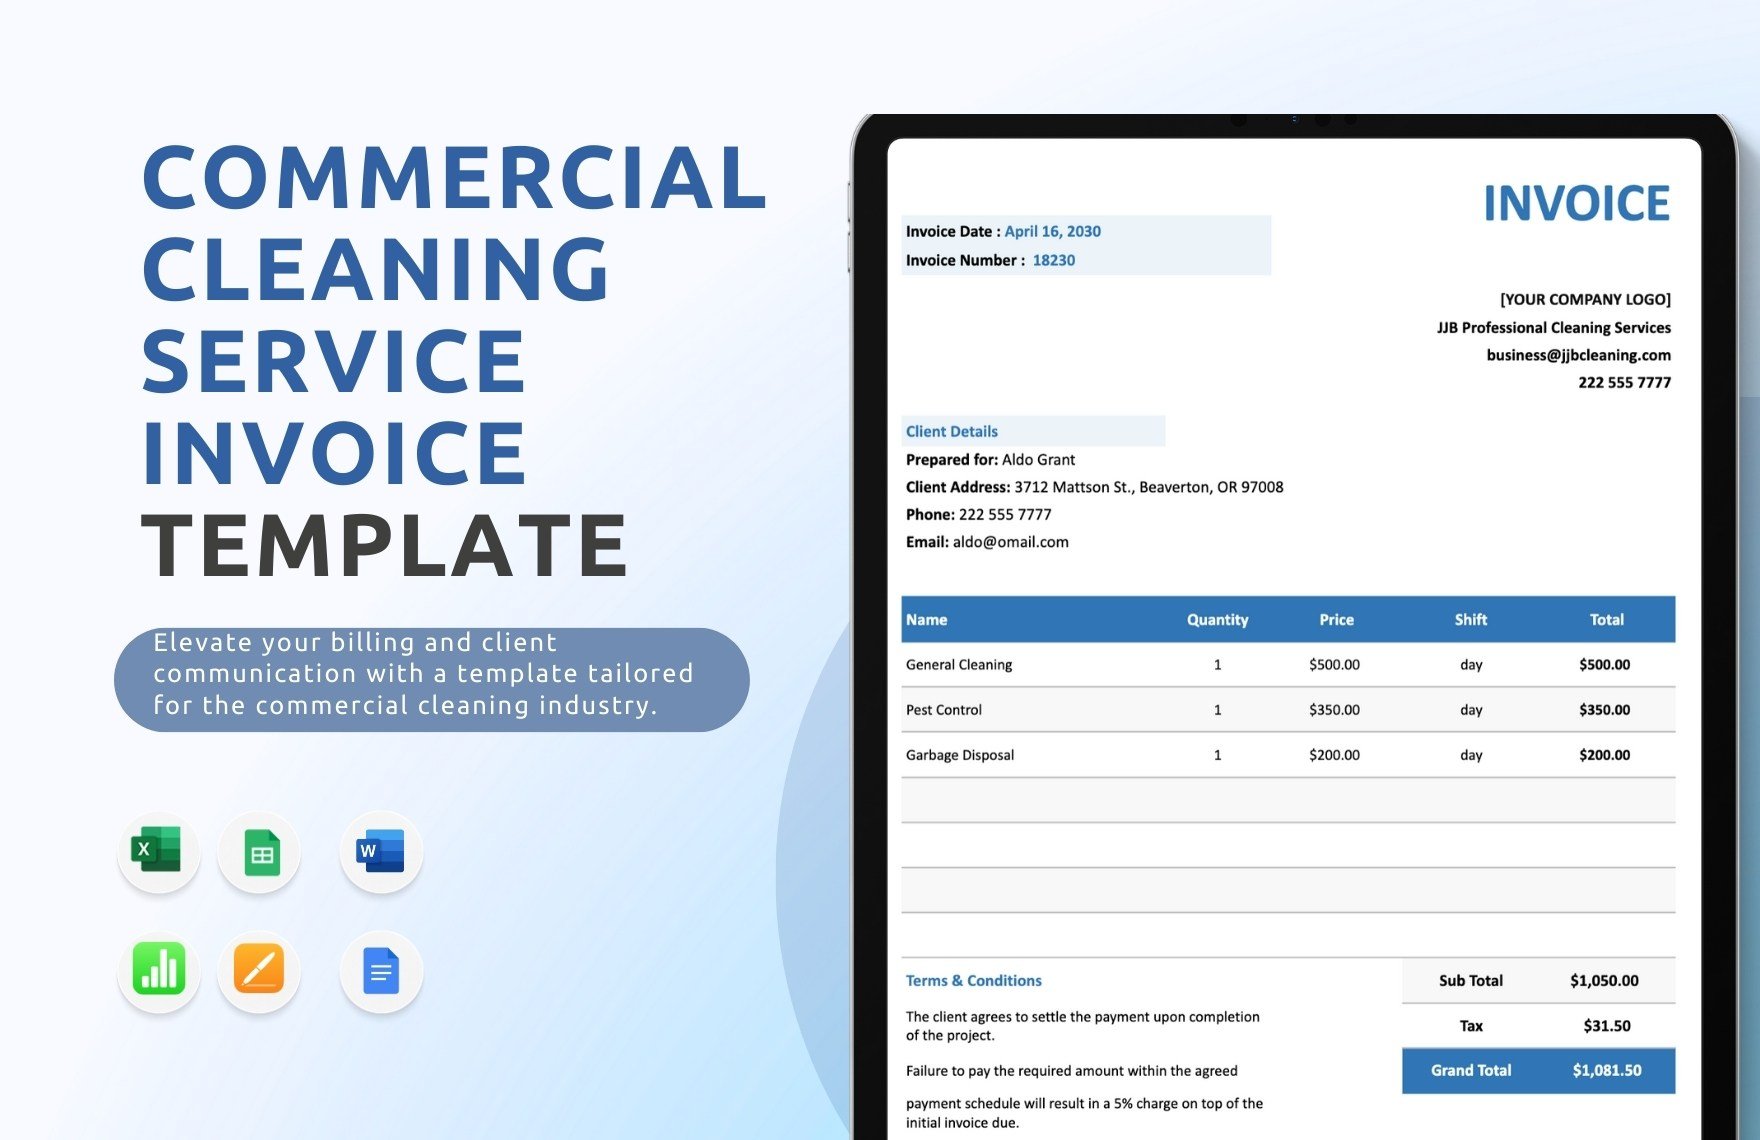 Commercial Cleaning Service Invoice Template